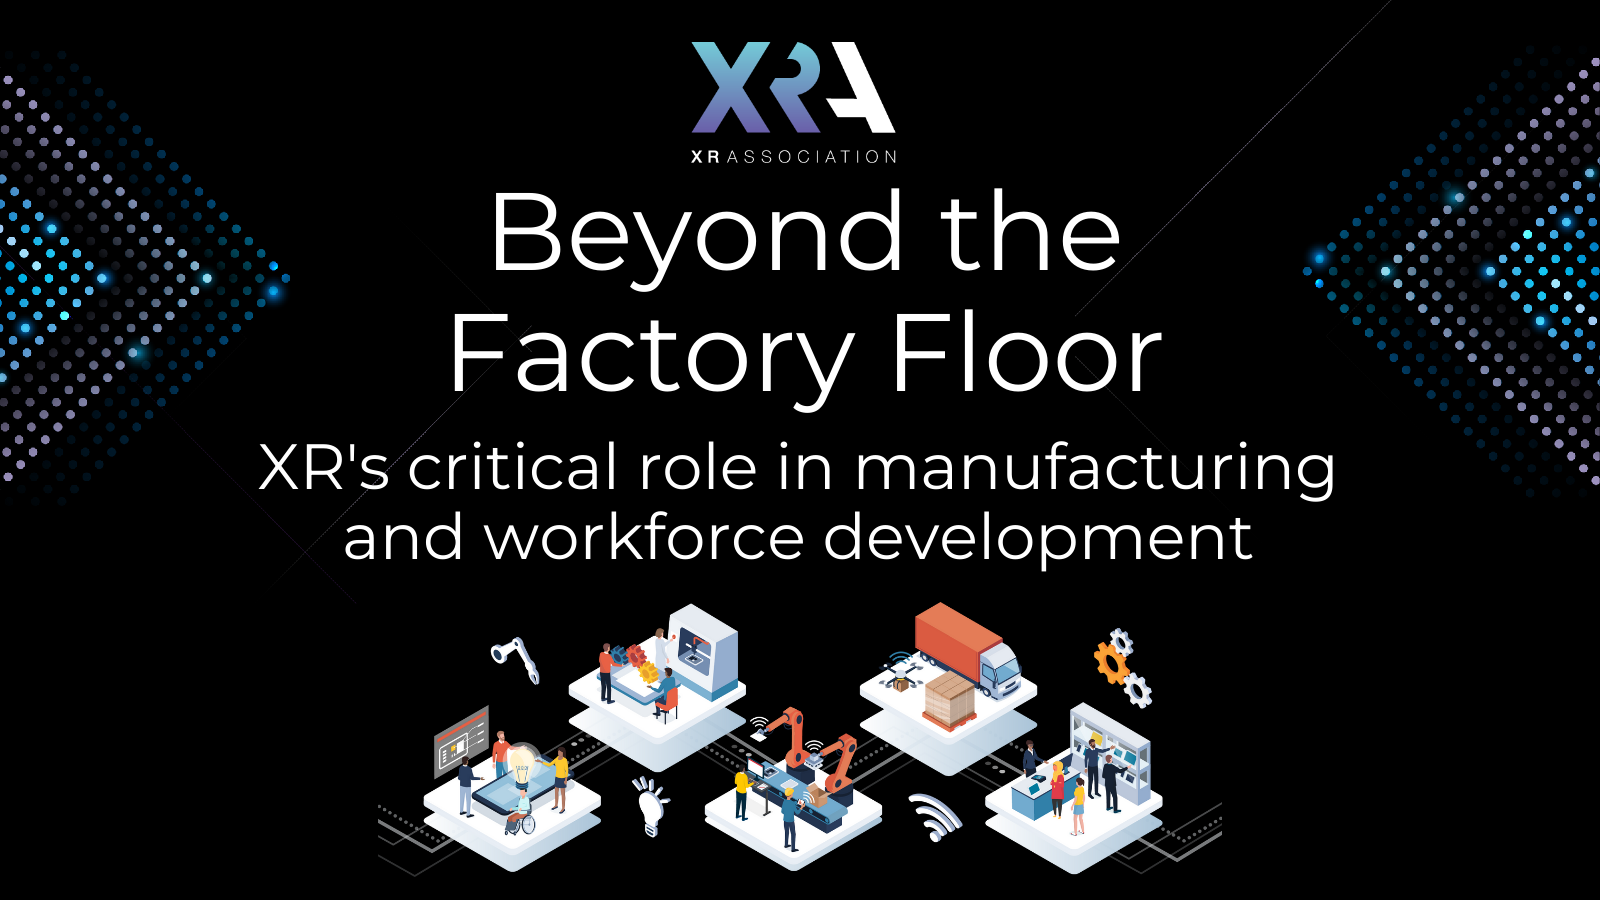 NEW SURVEY HIGHLIGHTS THE GROWING ROLE OF XR TECHNOLOGY IN MANUFACTURING AND WORKFORCE DEVELOPMENT